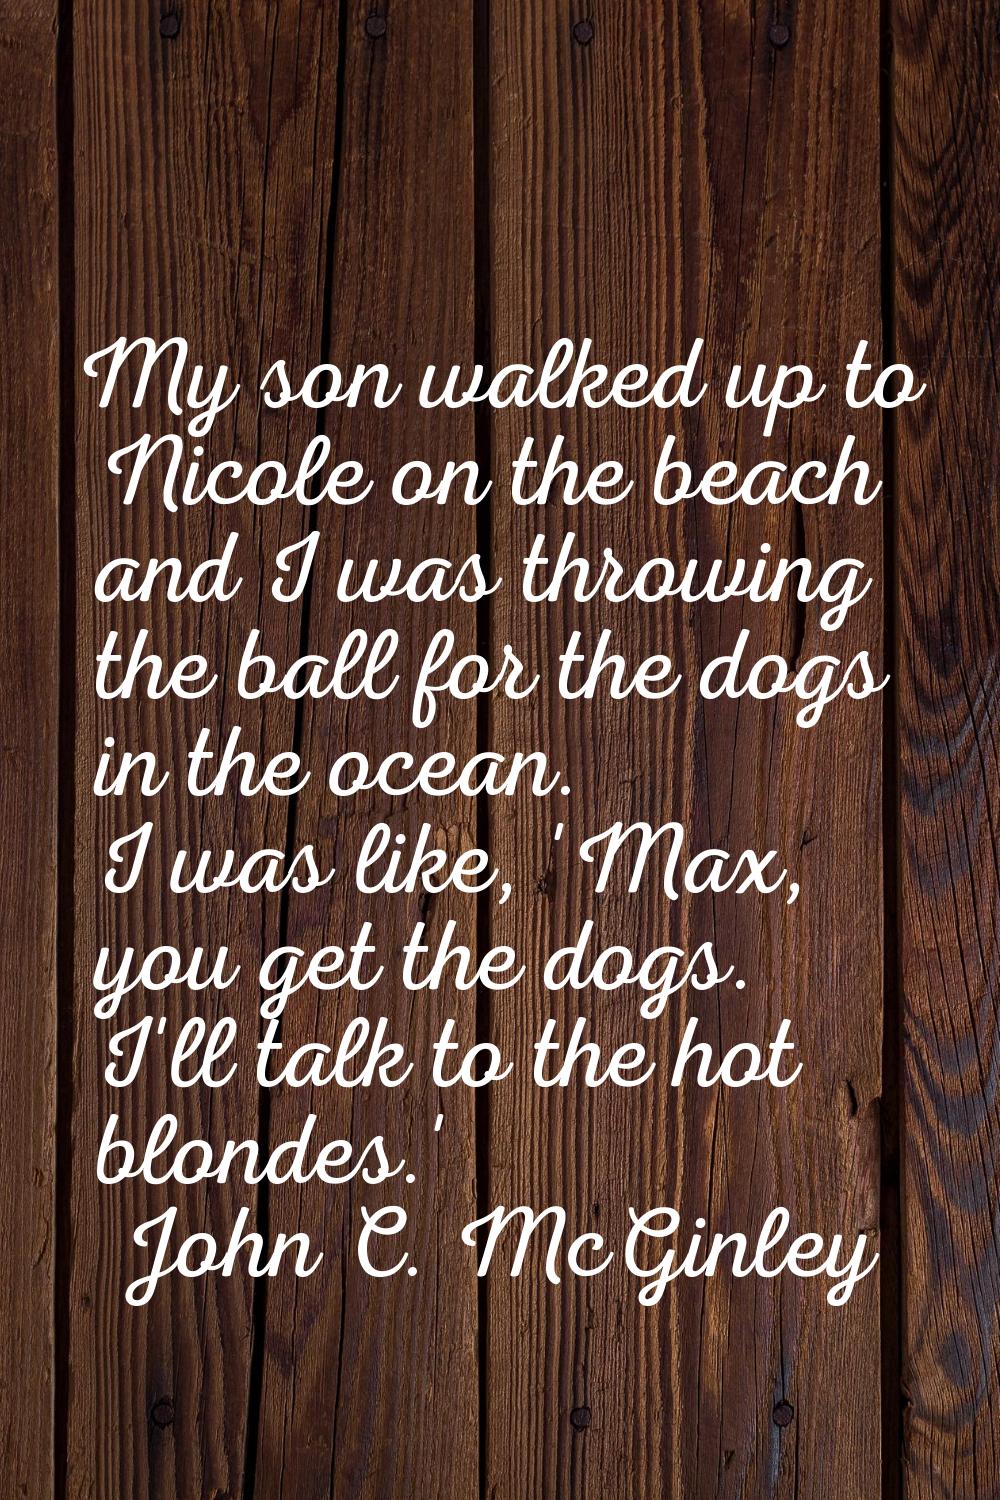 My son walked up to Nicole on the beach and I was throwing the ball for the dogs in the ocean. I wa